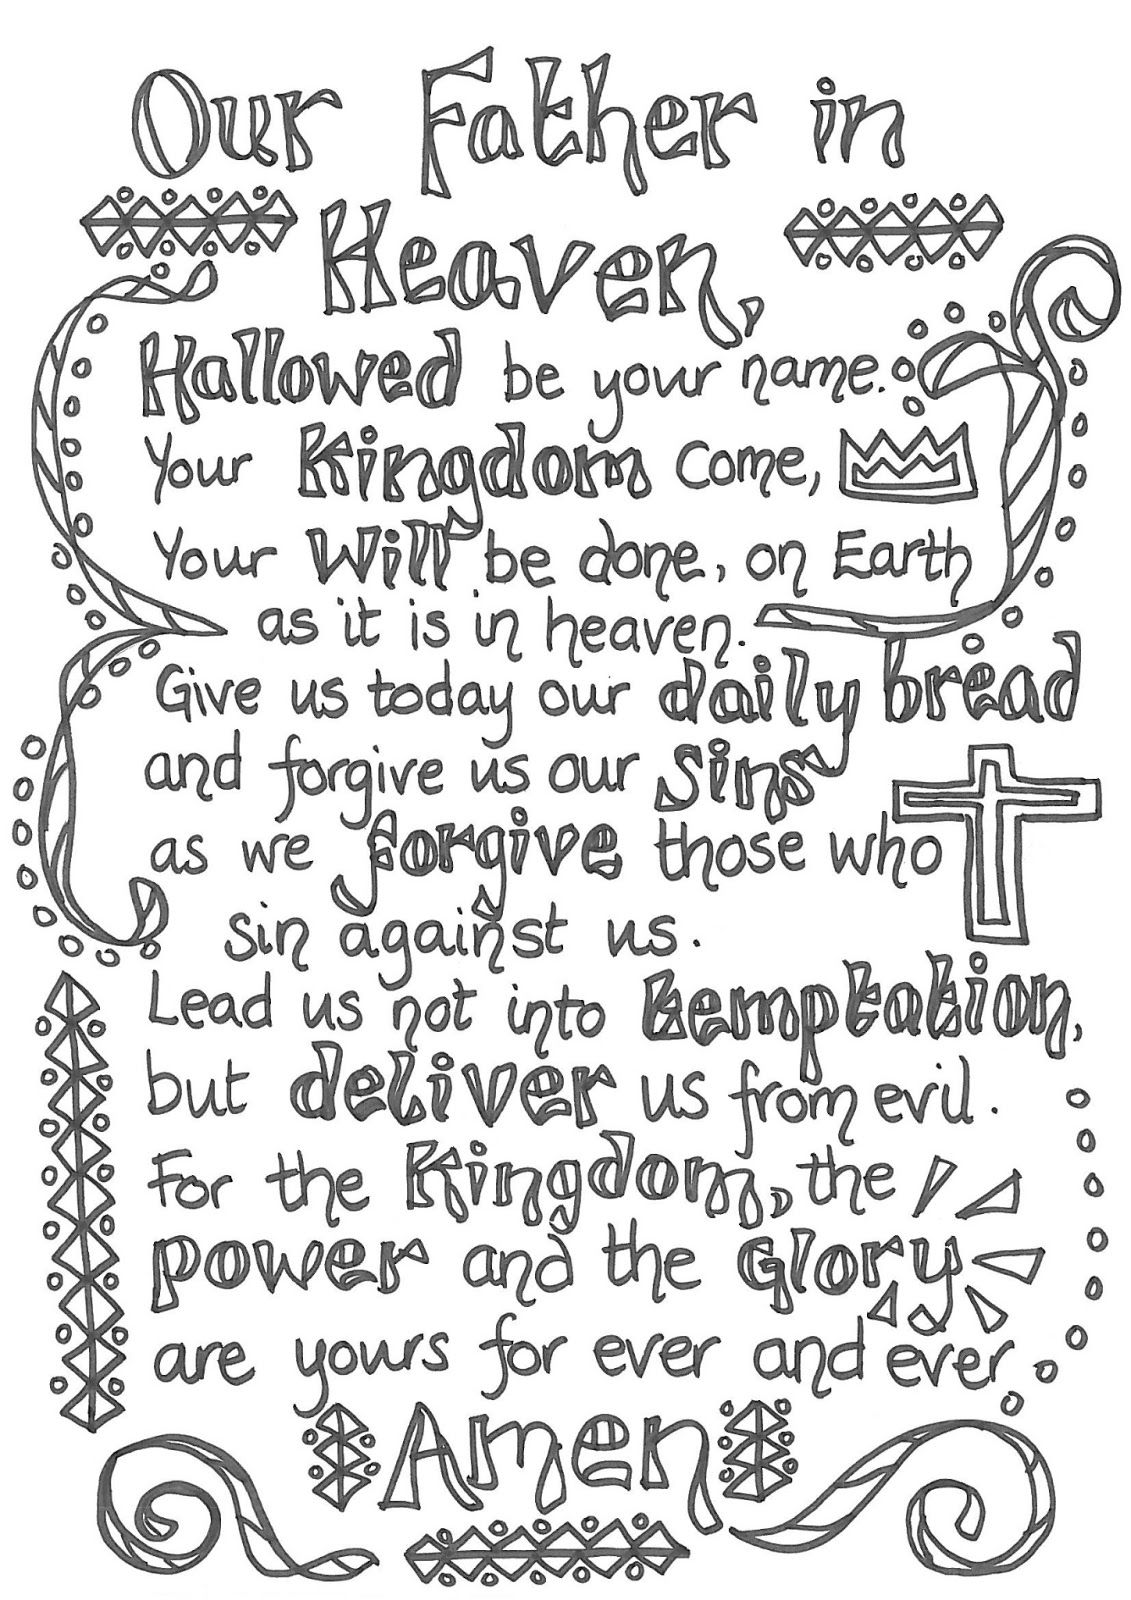 Flame: Creative Children's Ministry: Prayers to colour in!